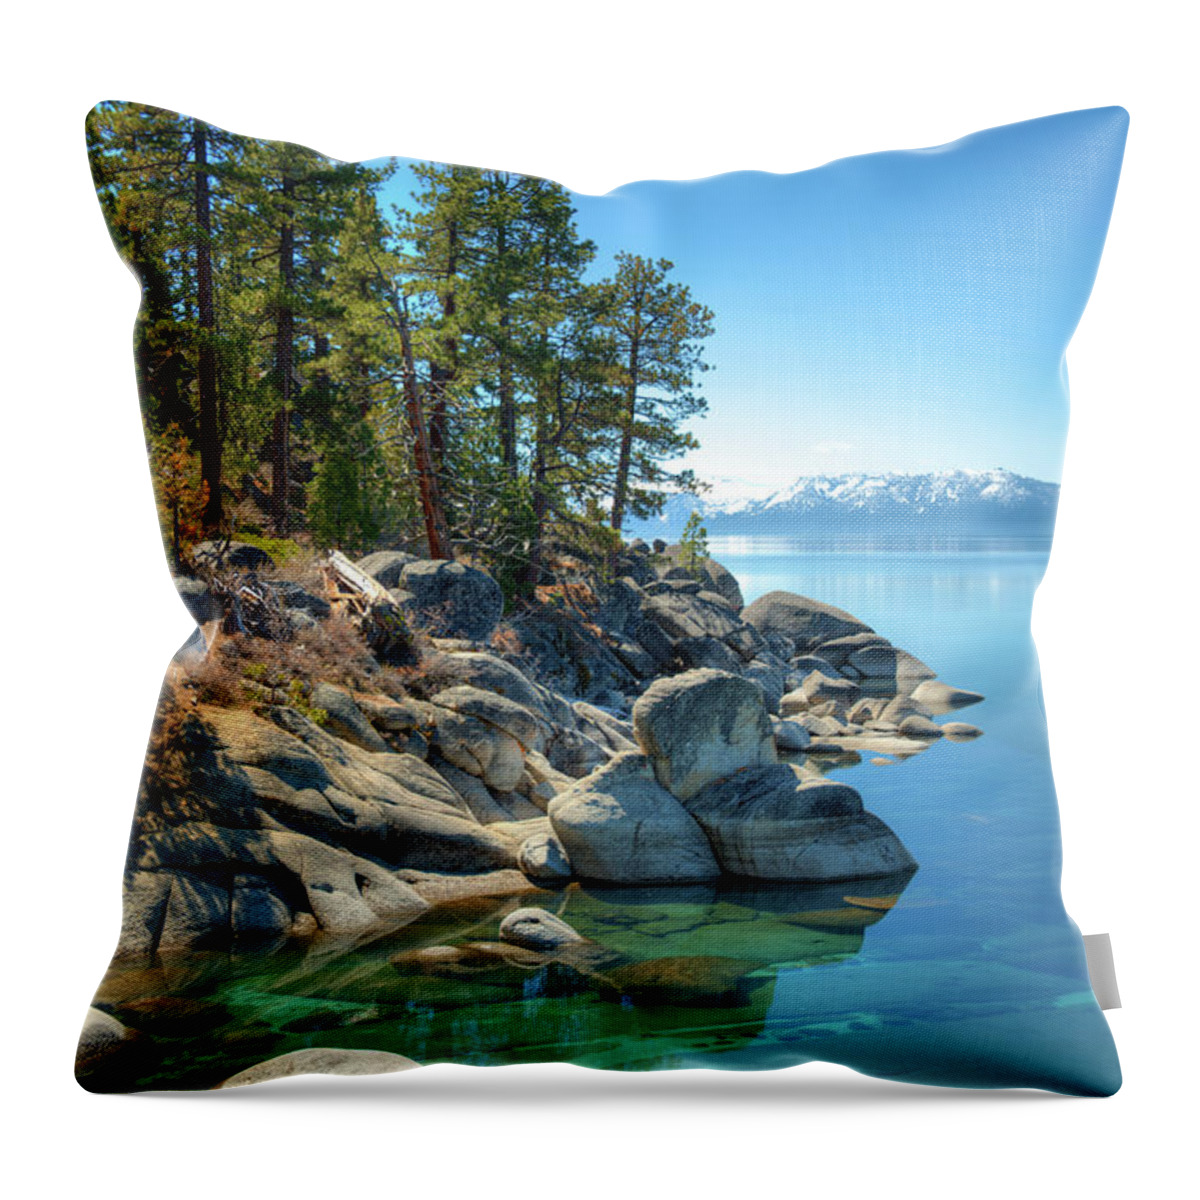 Scenics Throw Pillow featuring the photograph Lake Tahoe, The Rugged North Shore by Ed Freeman